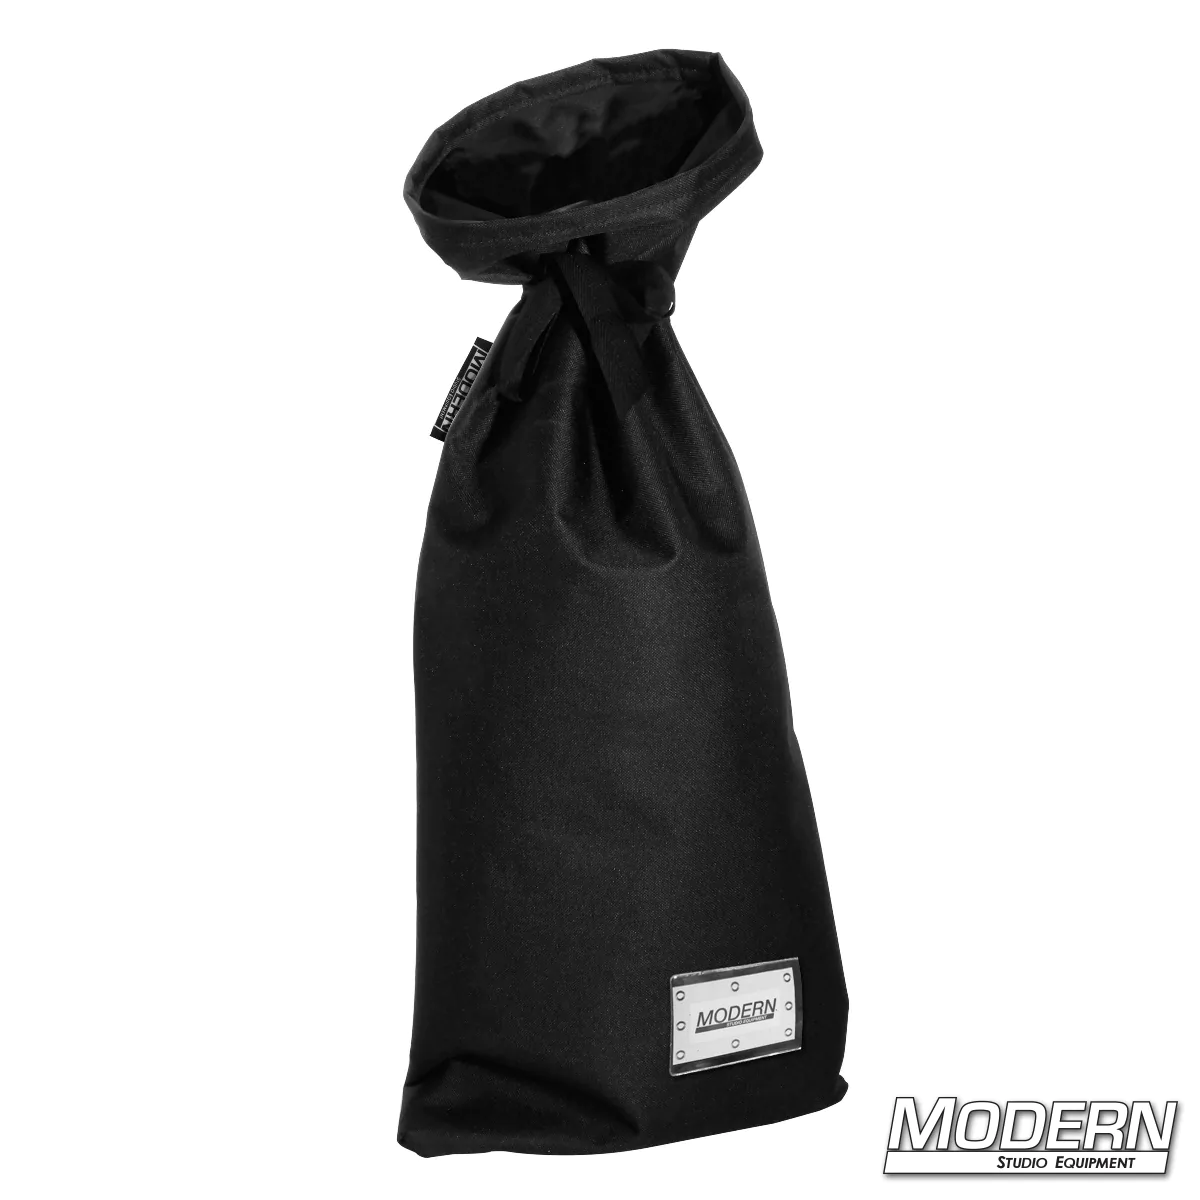 Unbleached Muslin with Bag